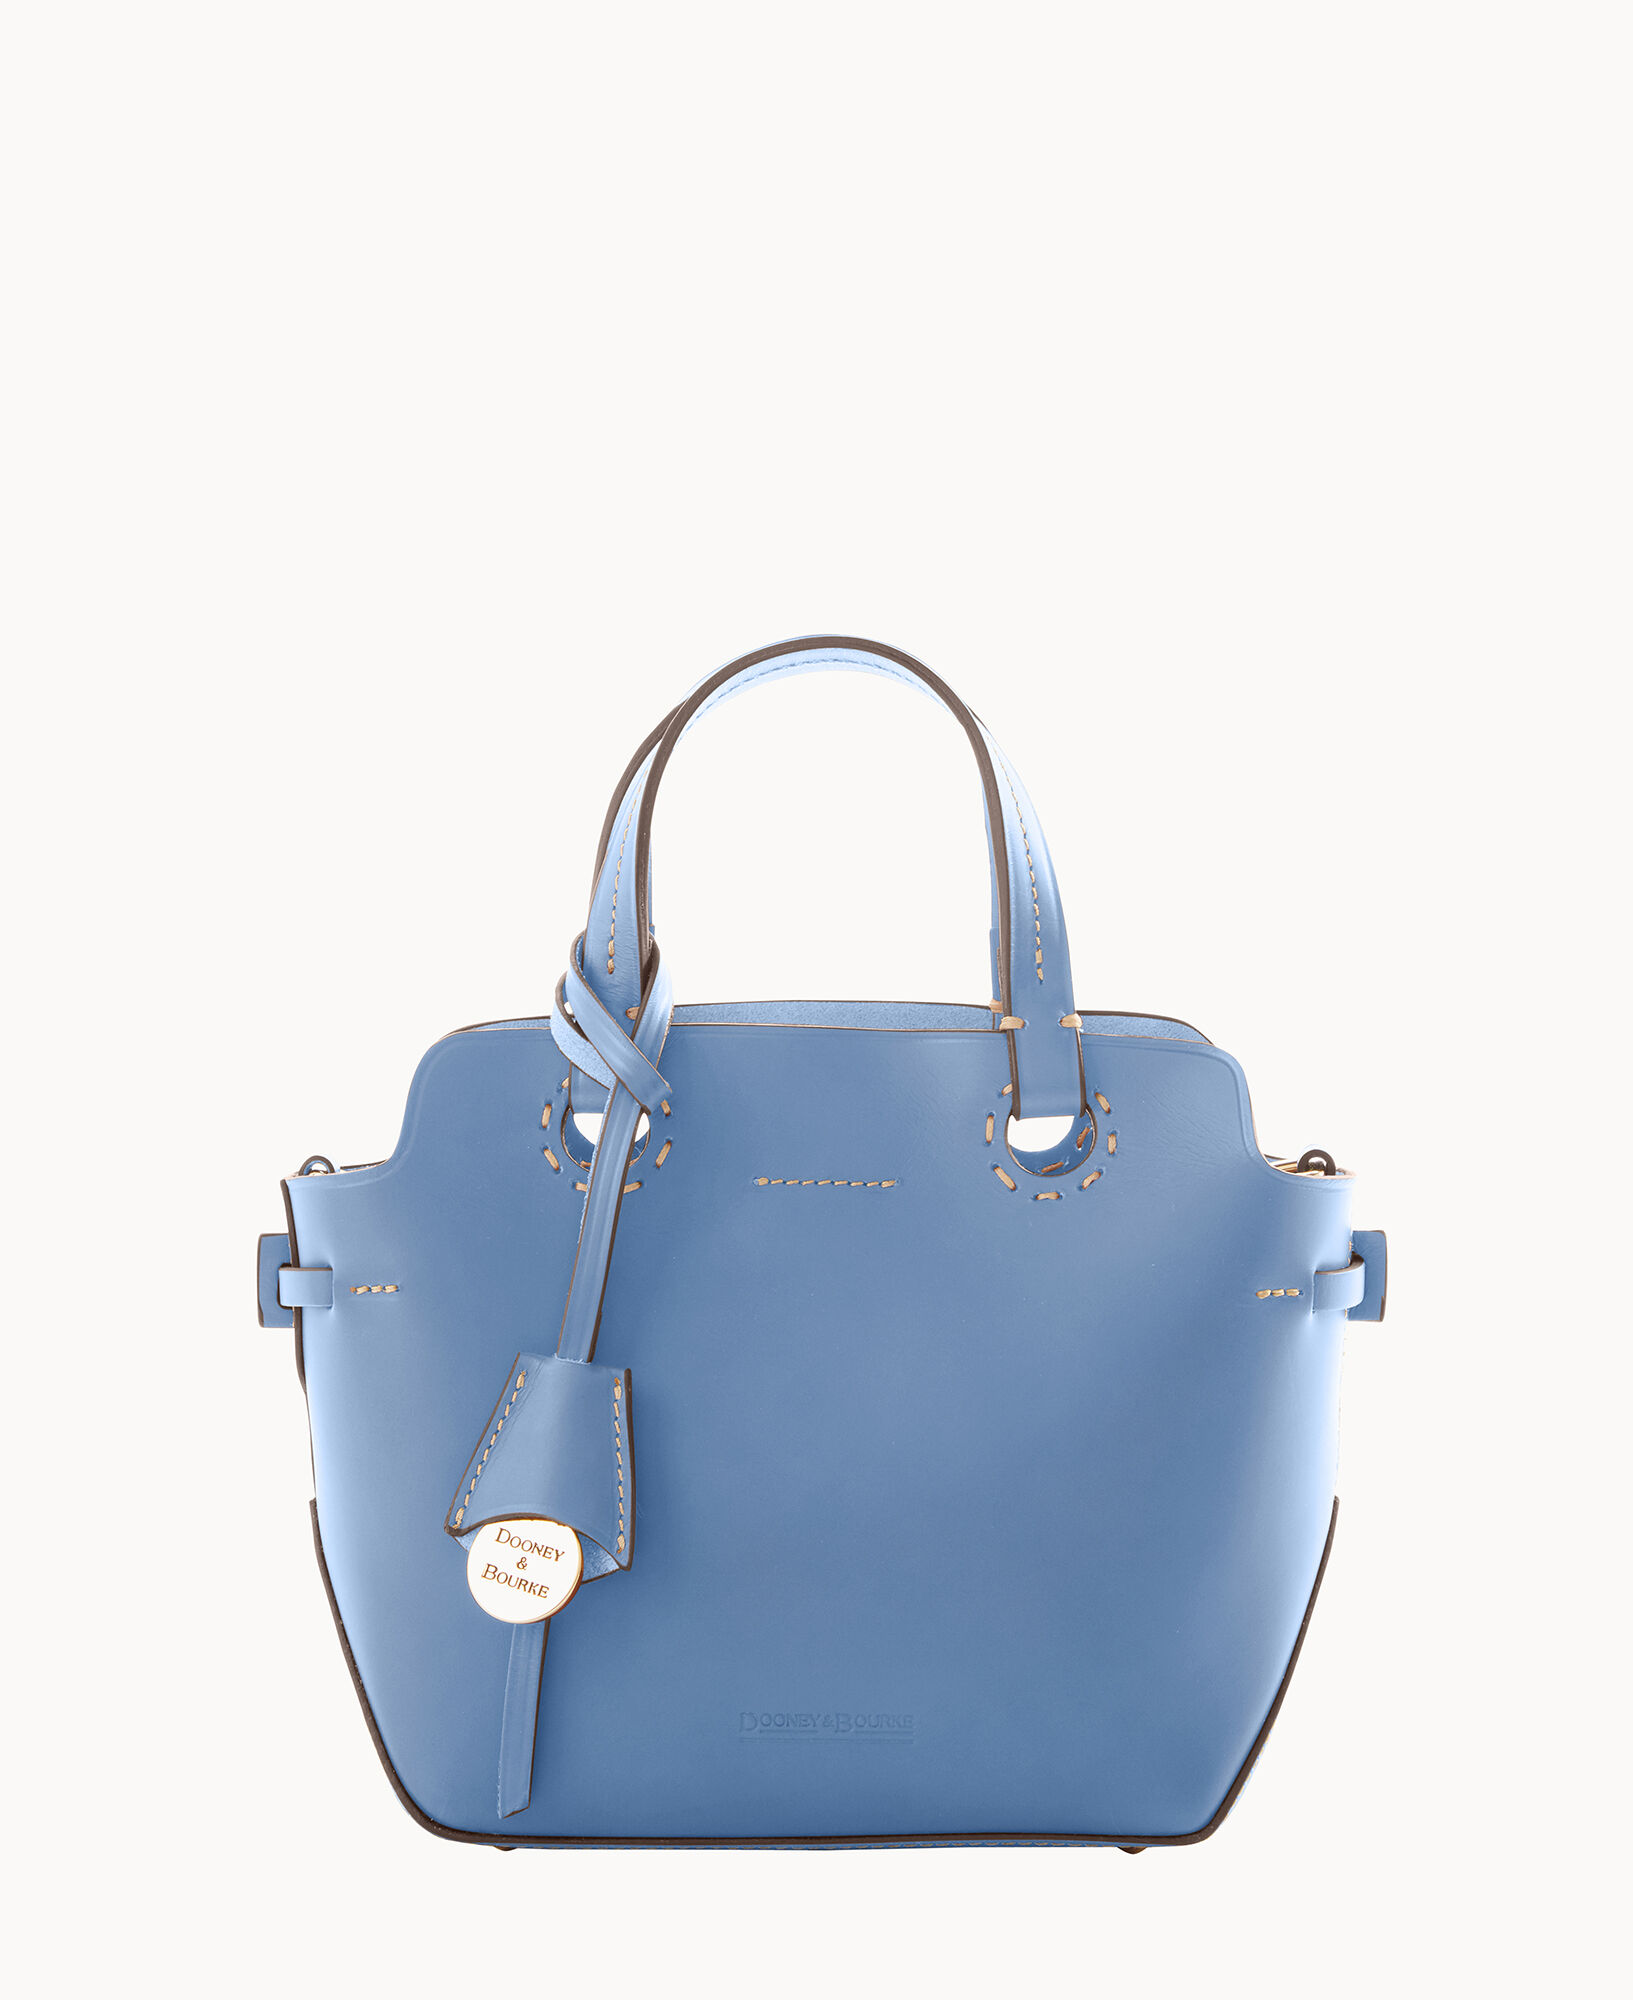 Furla Women's Blue Tote Bags with Cash Back